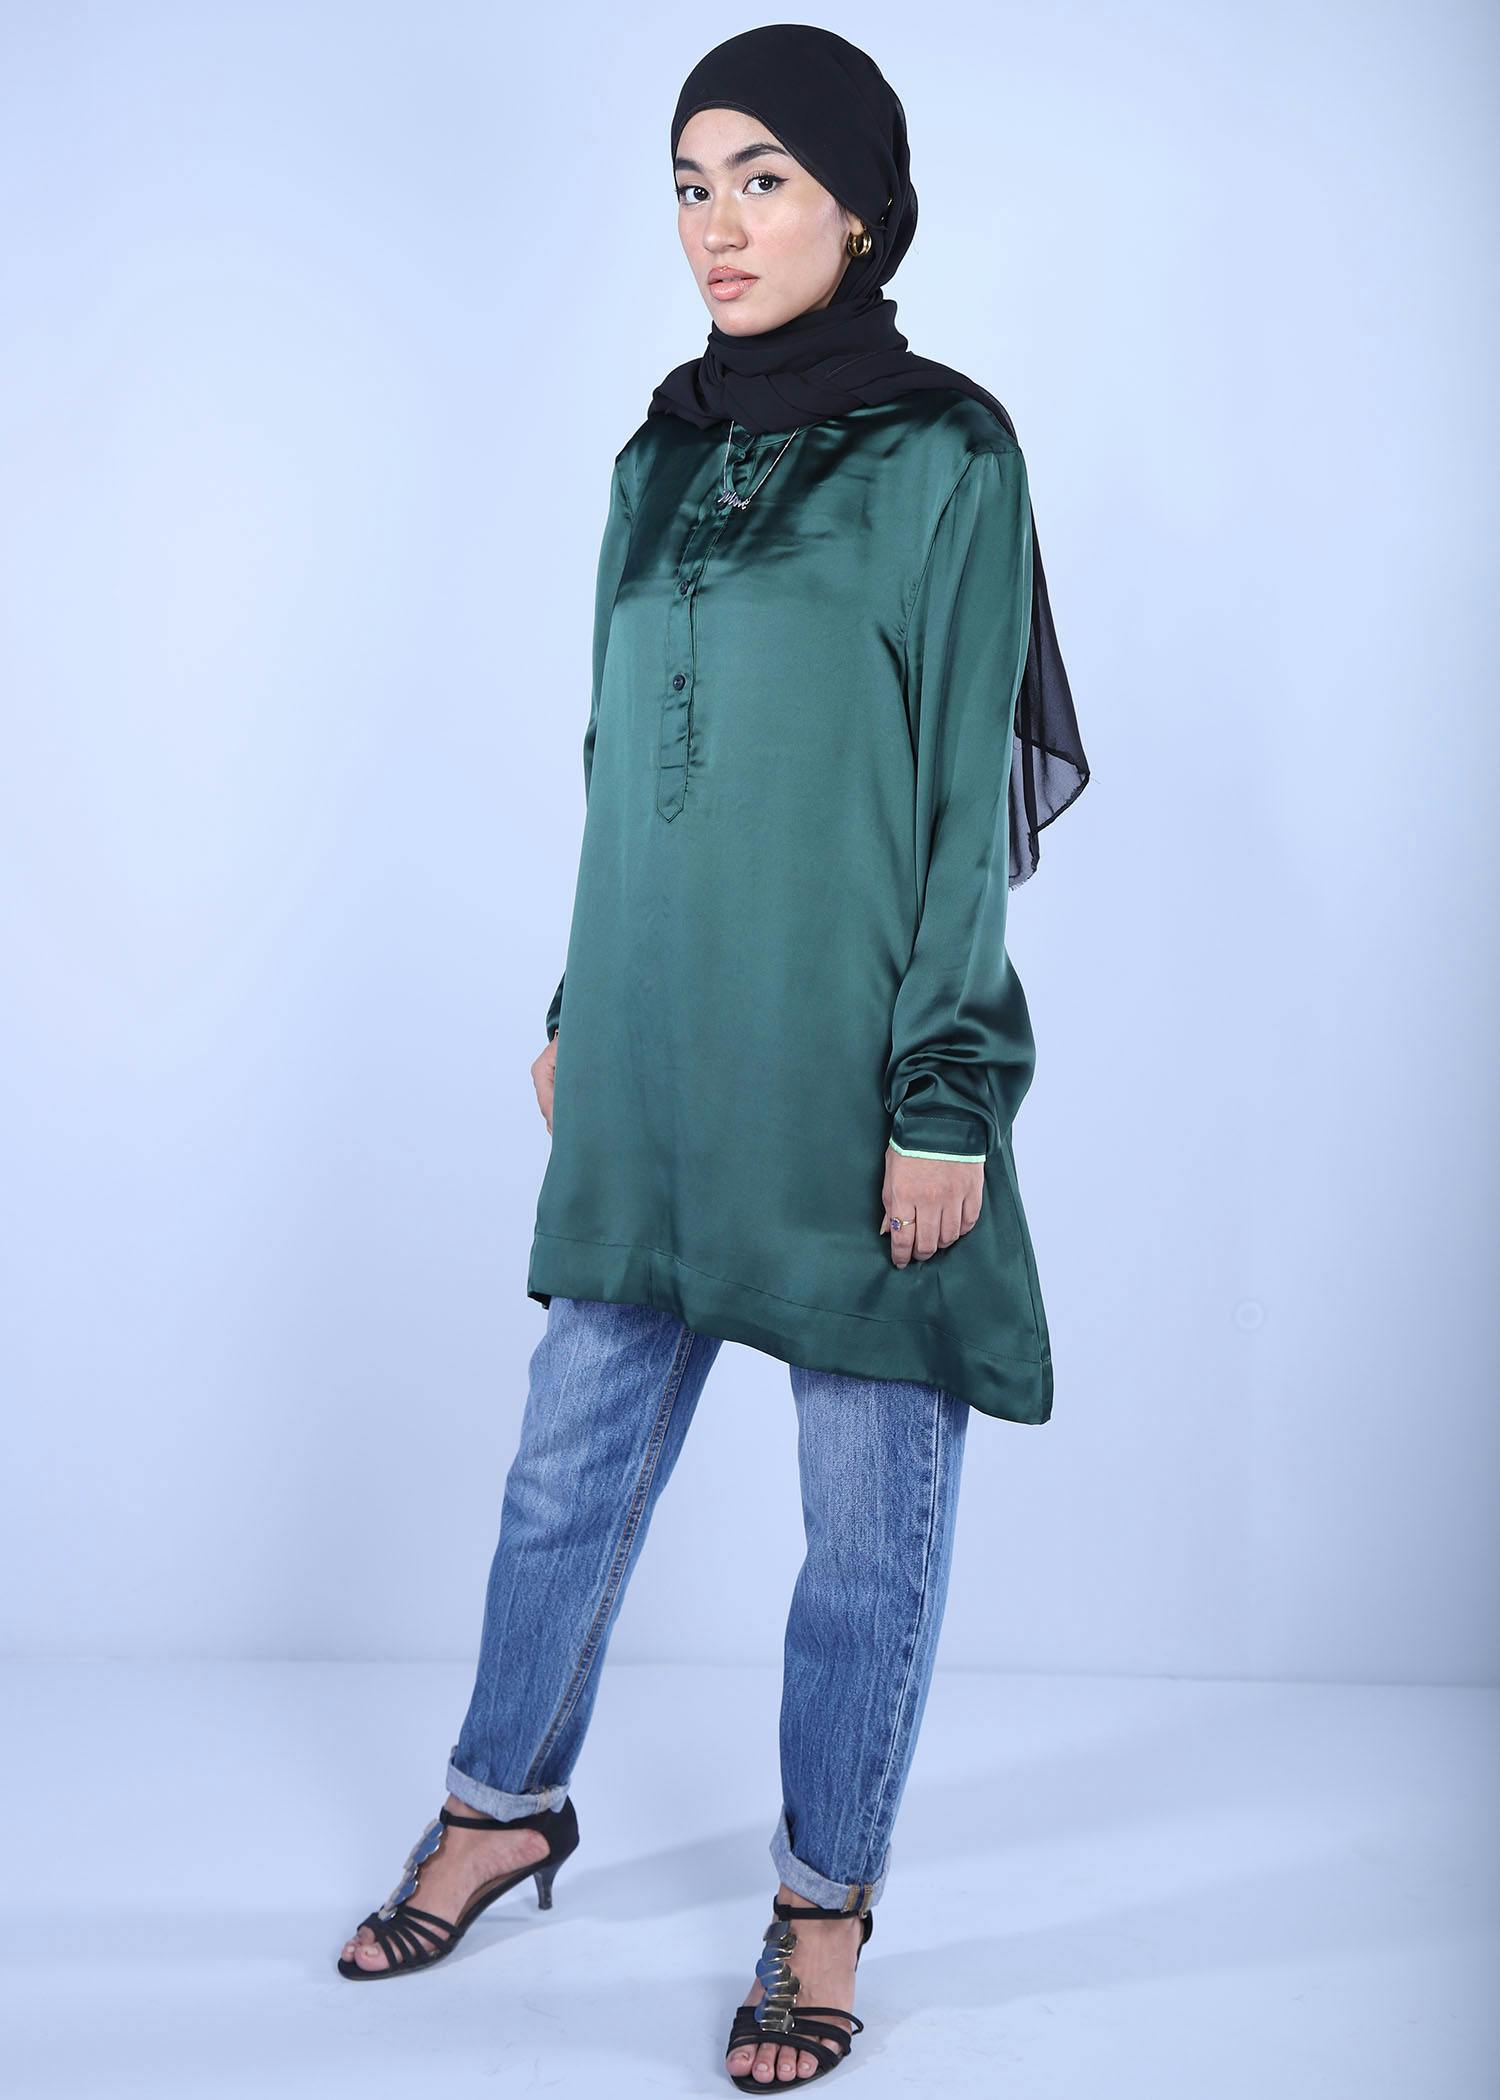 uvaria ladies tops bottle green color full side view